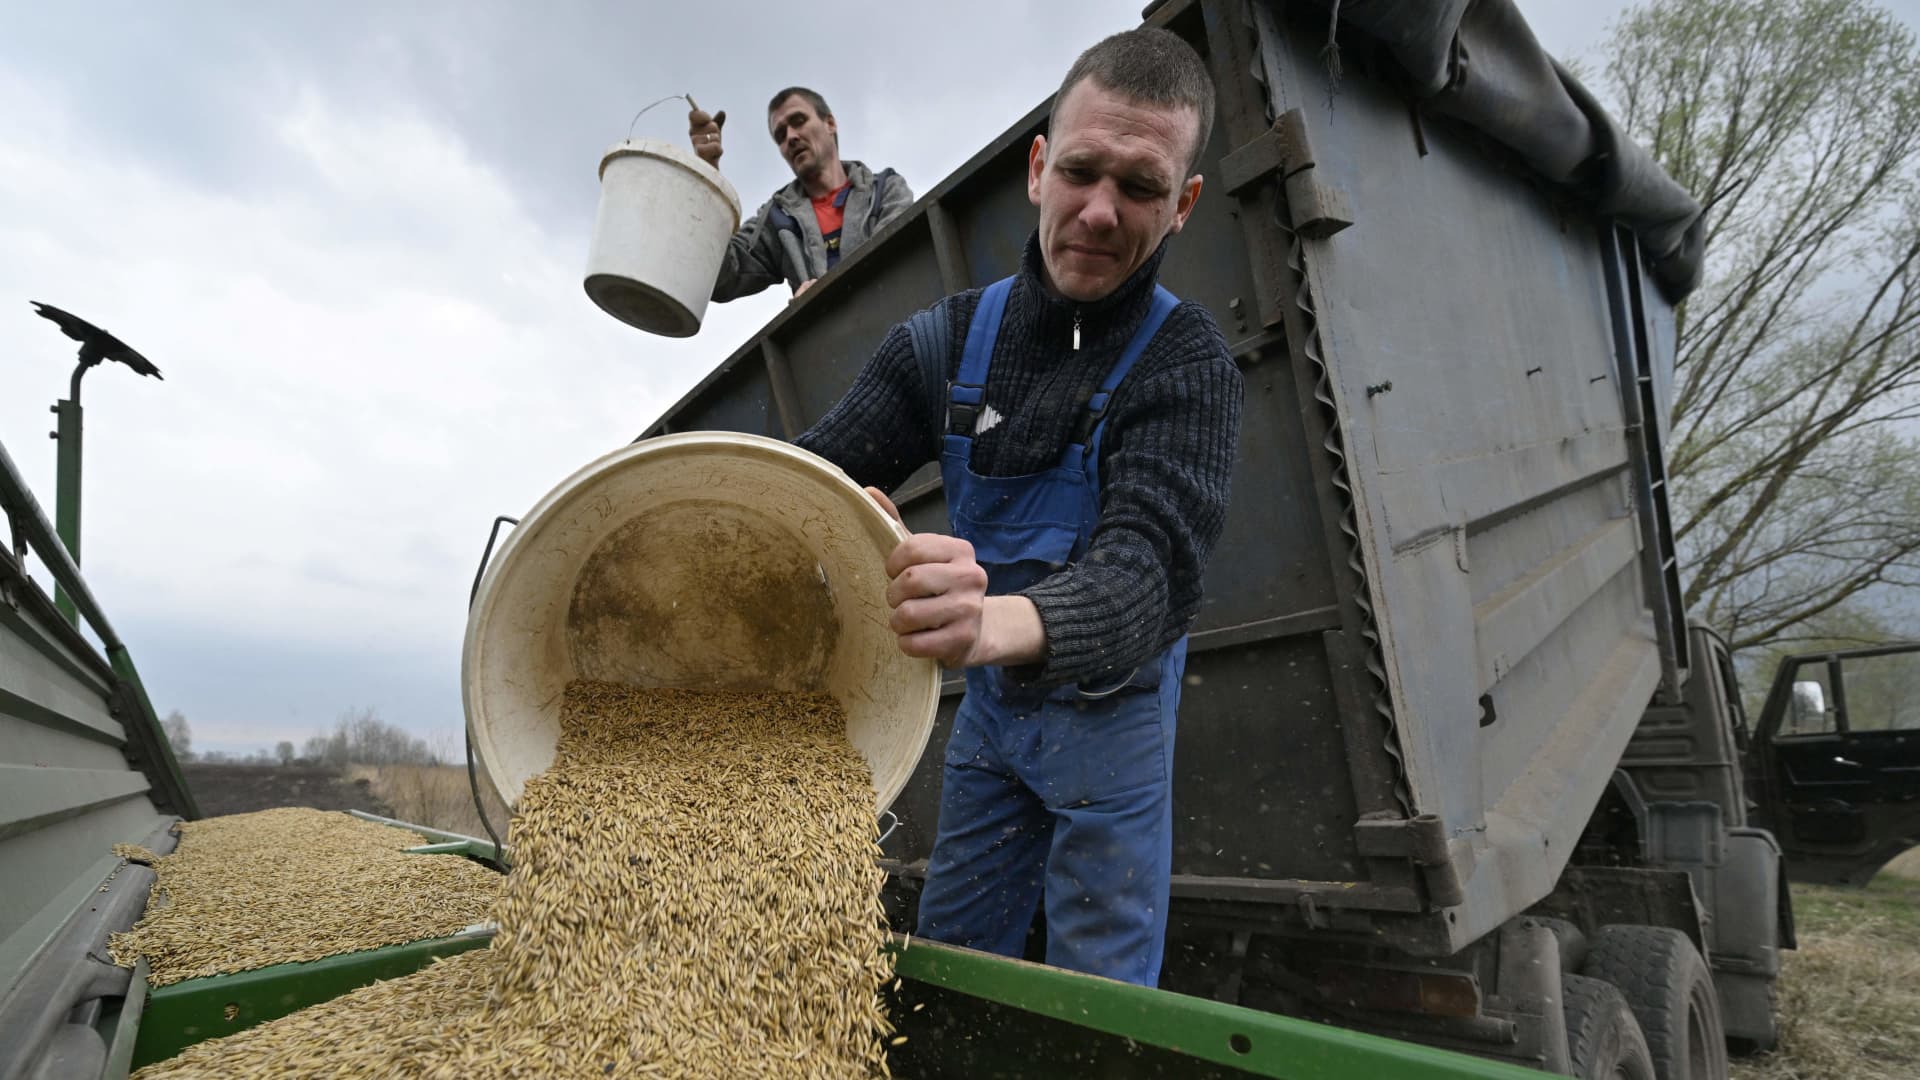 Farmers load oat in the seeding-machine to sow in a field east of Kyiv on April 16, 2022. The U.K. announced on Monday all tariffs and quotas on goods from Ukraine will be removed under the free trade agreement.